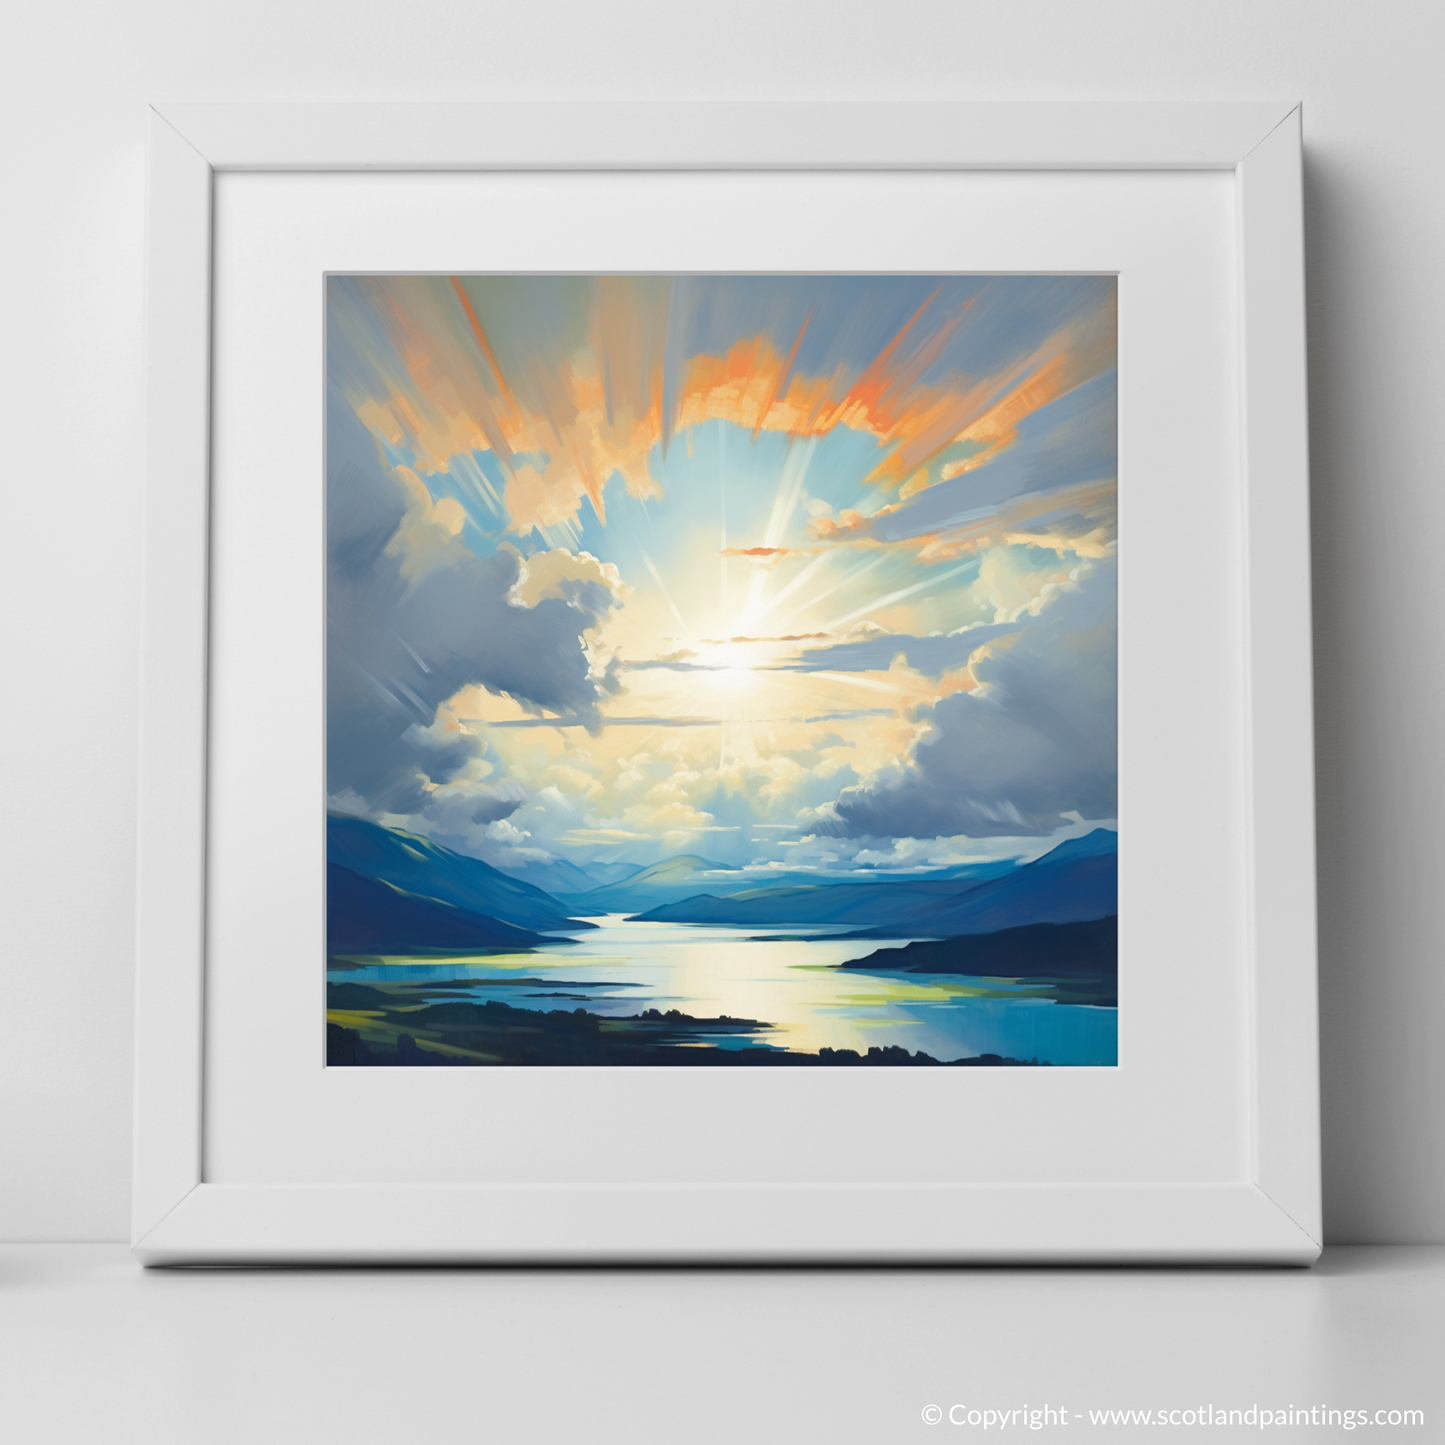 Art Print of Sun rays through clouds above Loch Lomond with a white frame